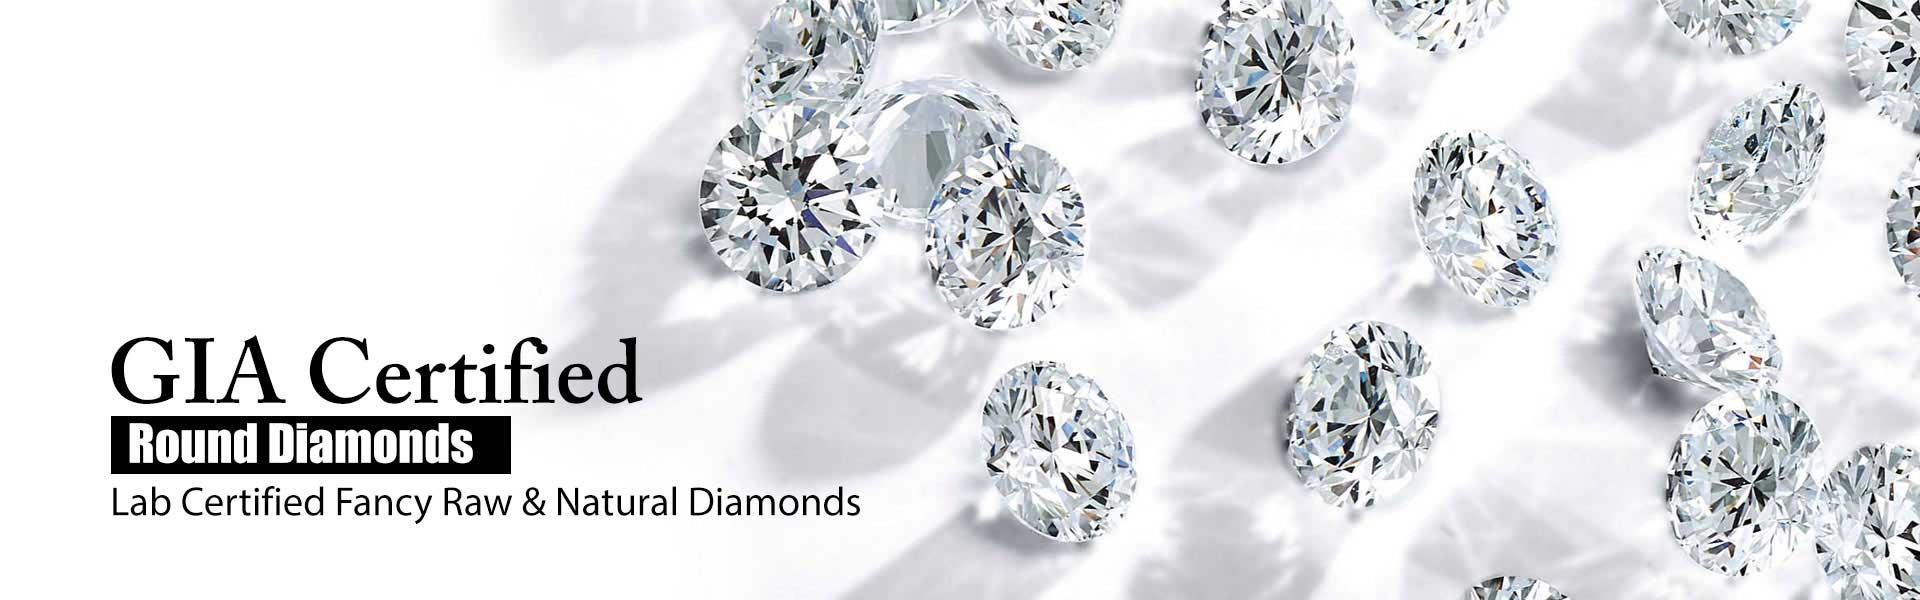  Certified Diamond  Manufacturers in Doha